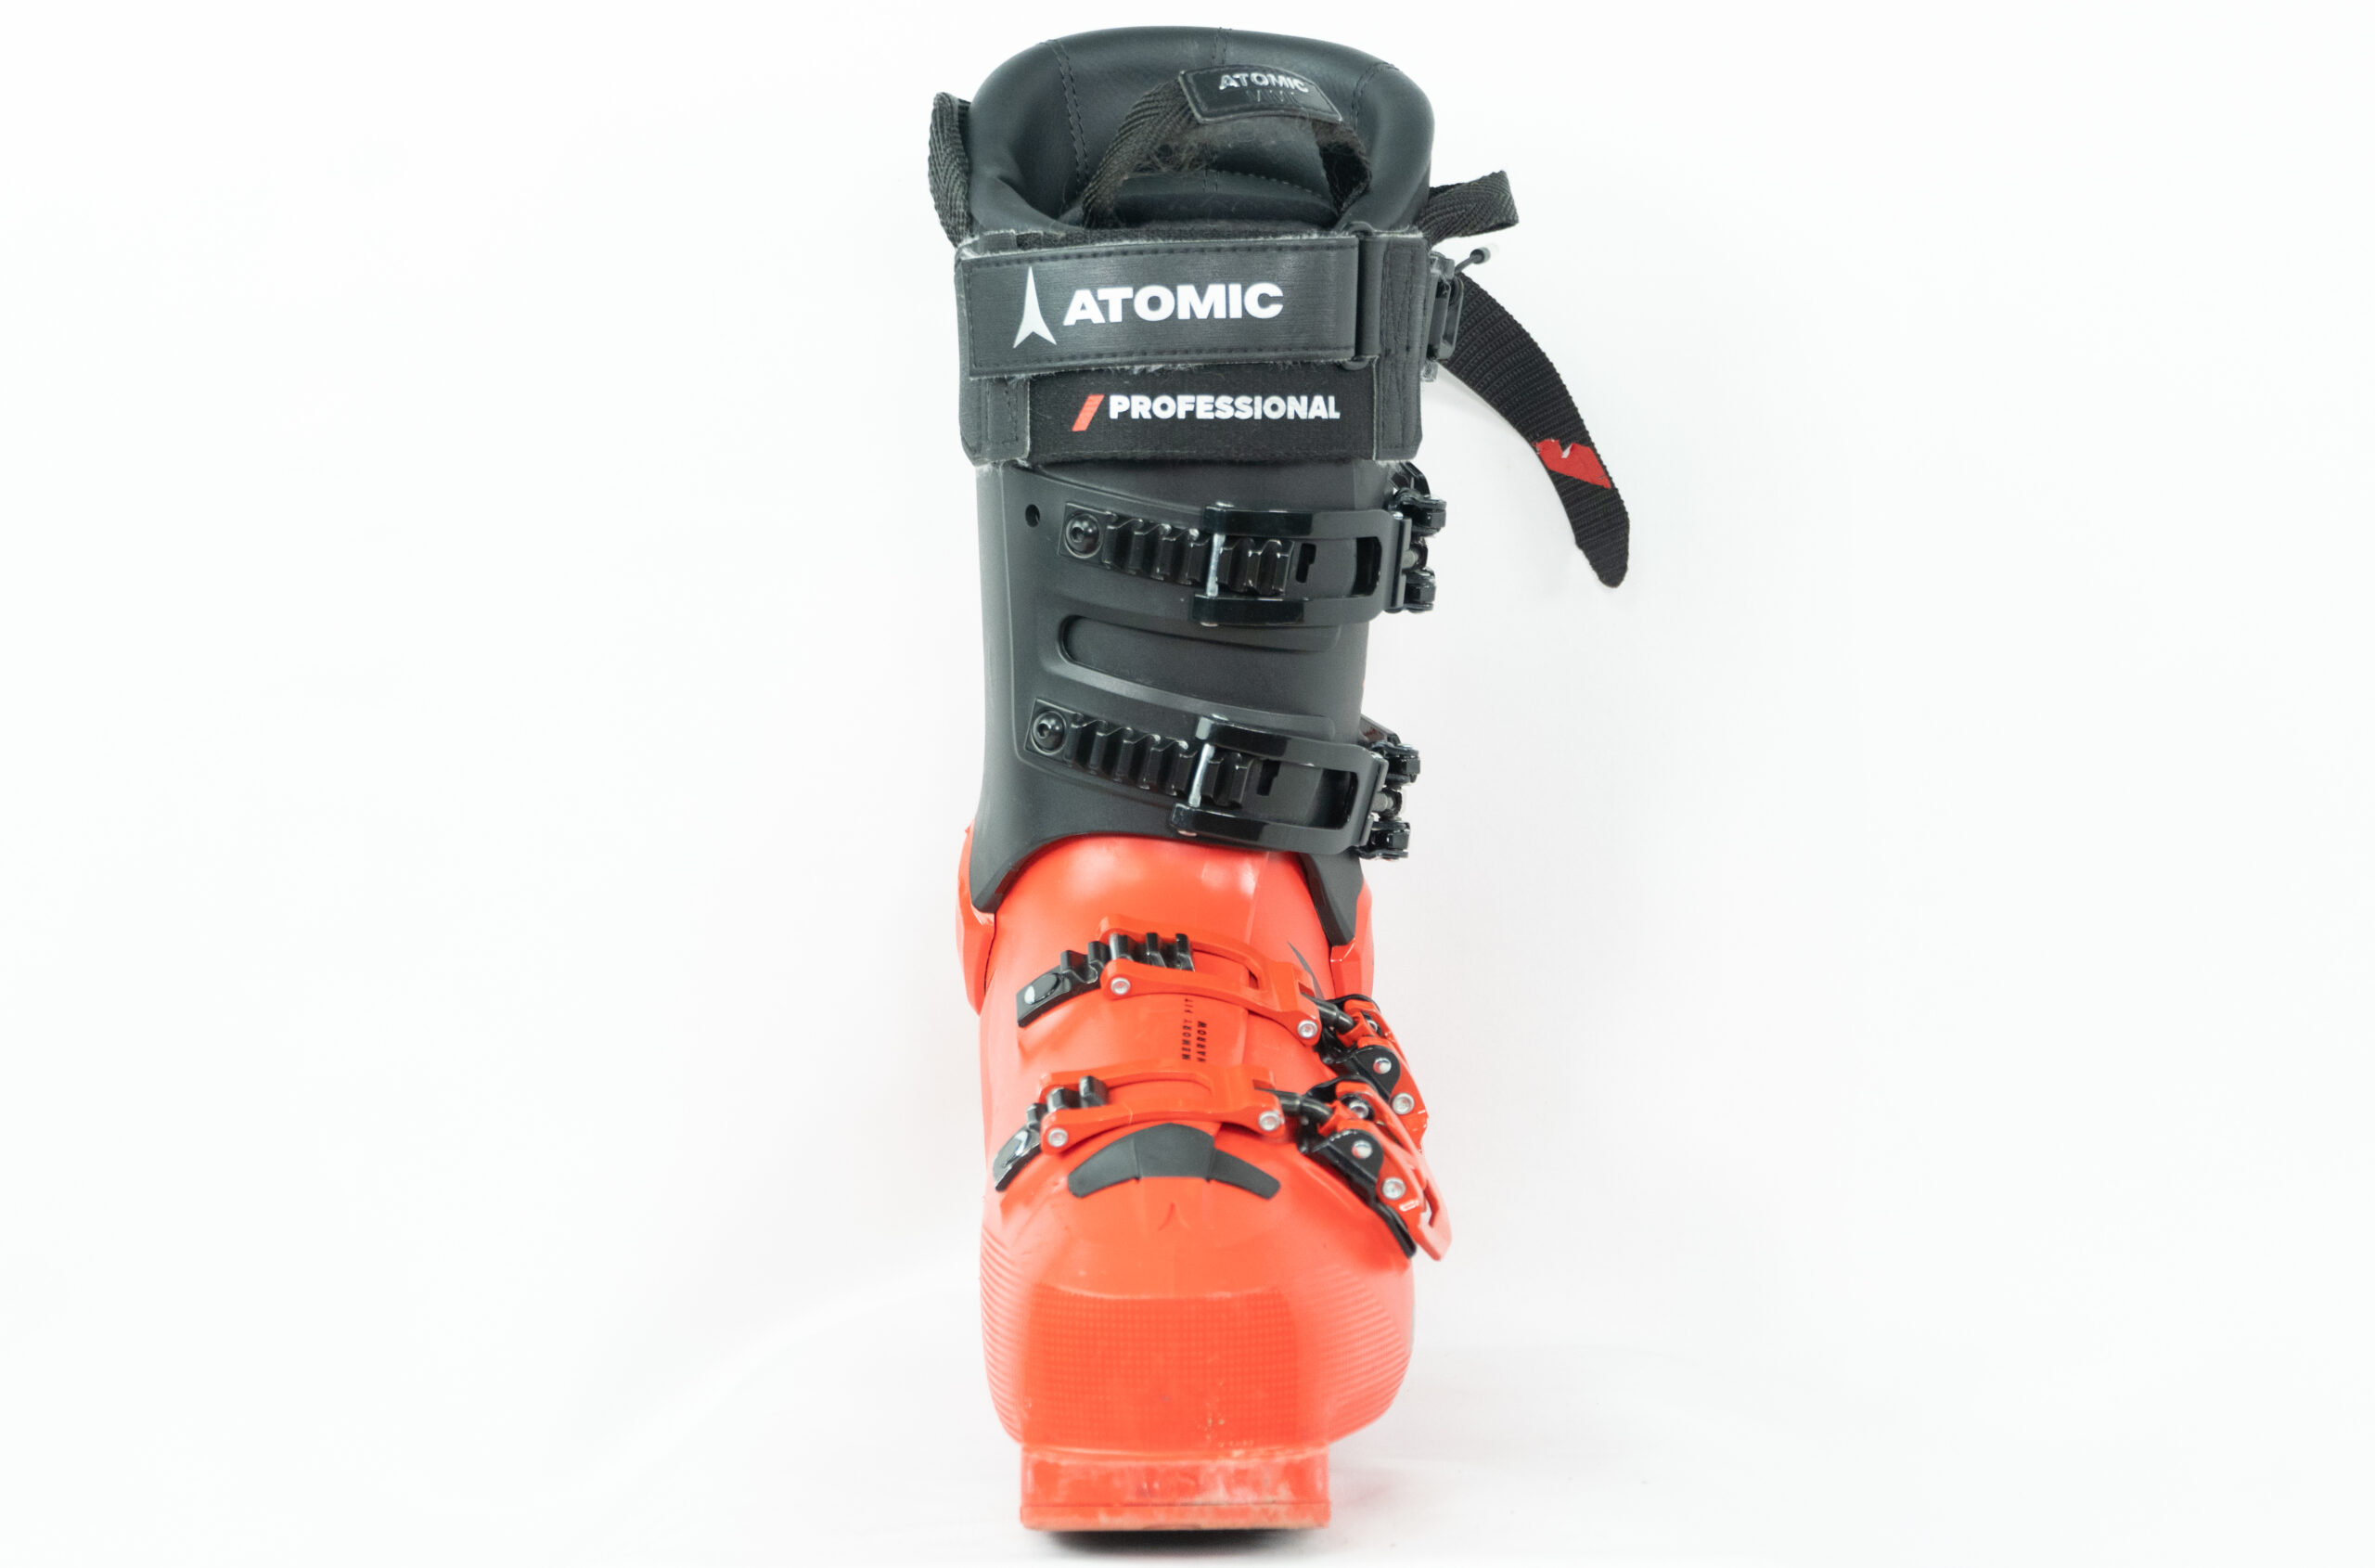 Dylan Wood discusses the Atomic Hawx Ultra 130 S GW for Blister